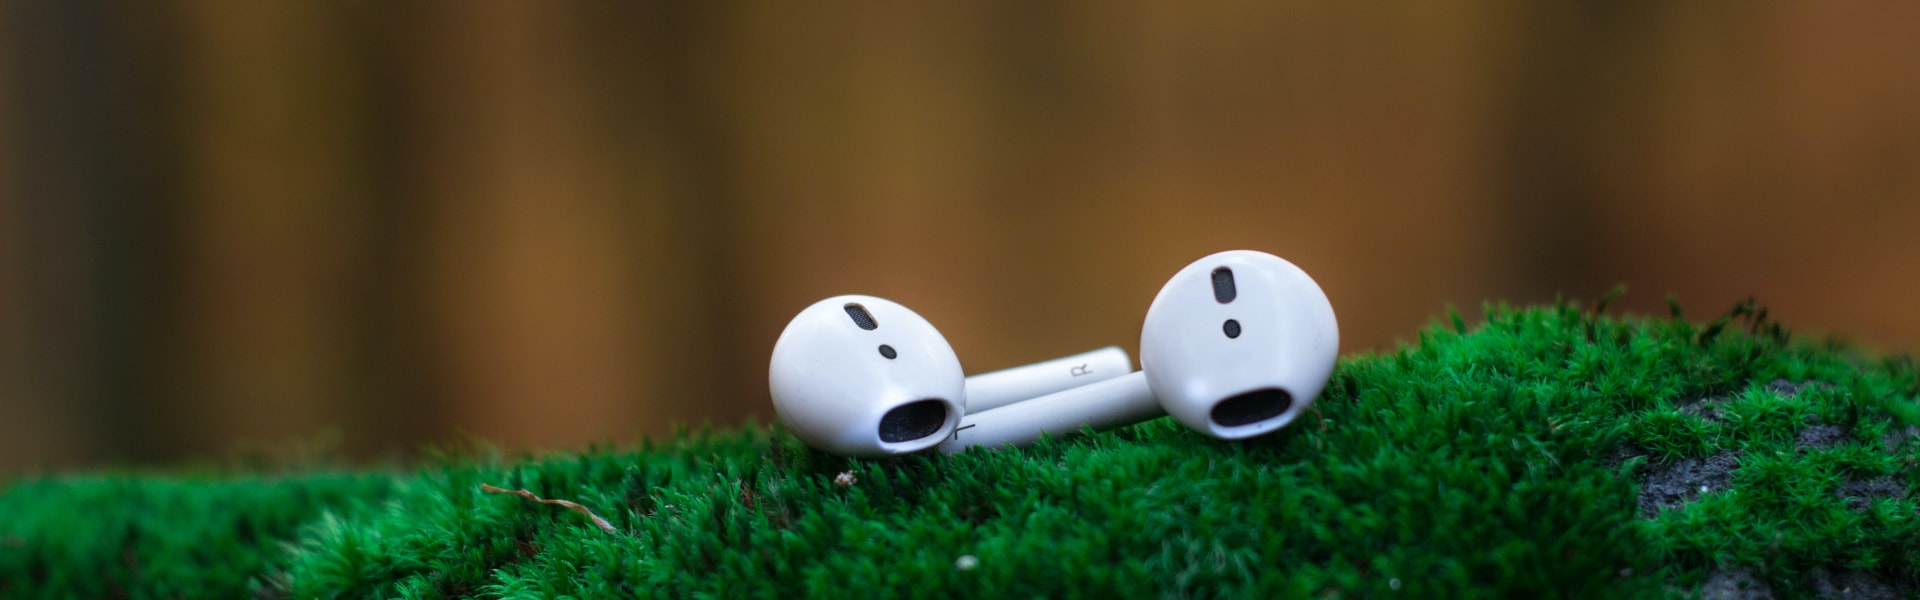 Close-up photos of white earbuds